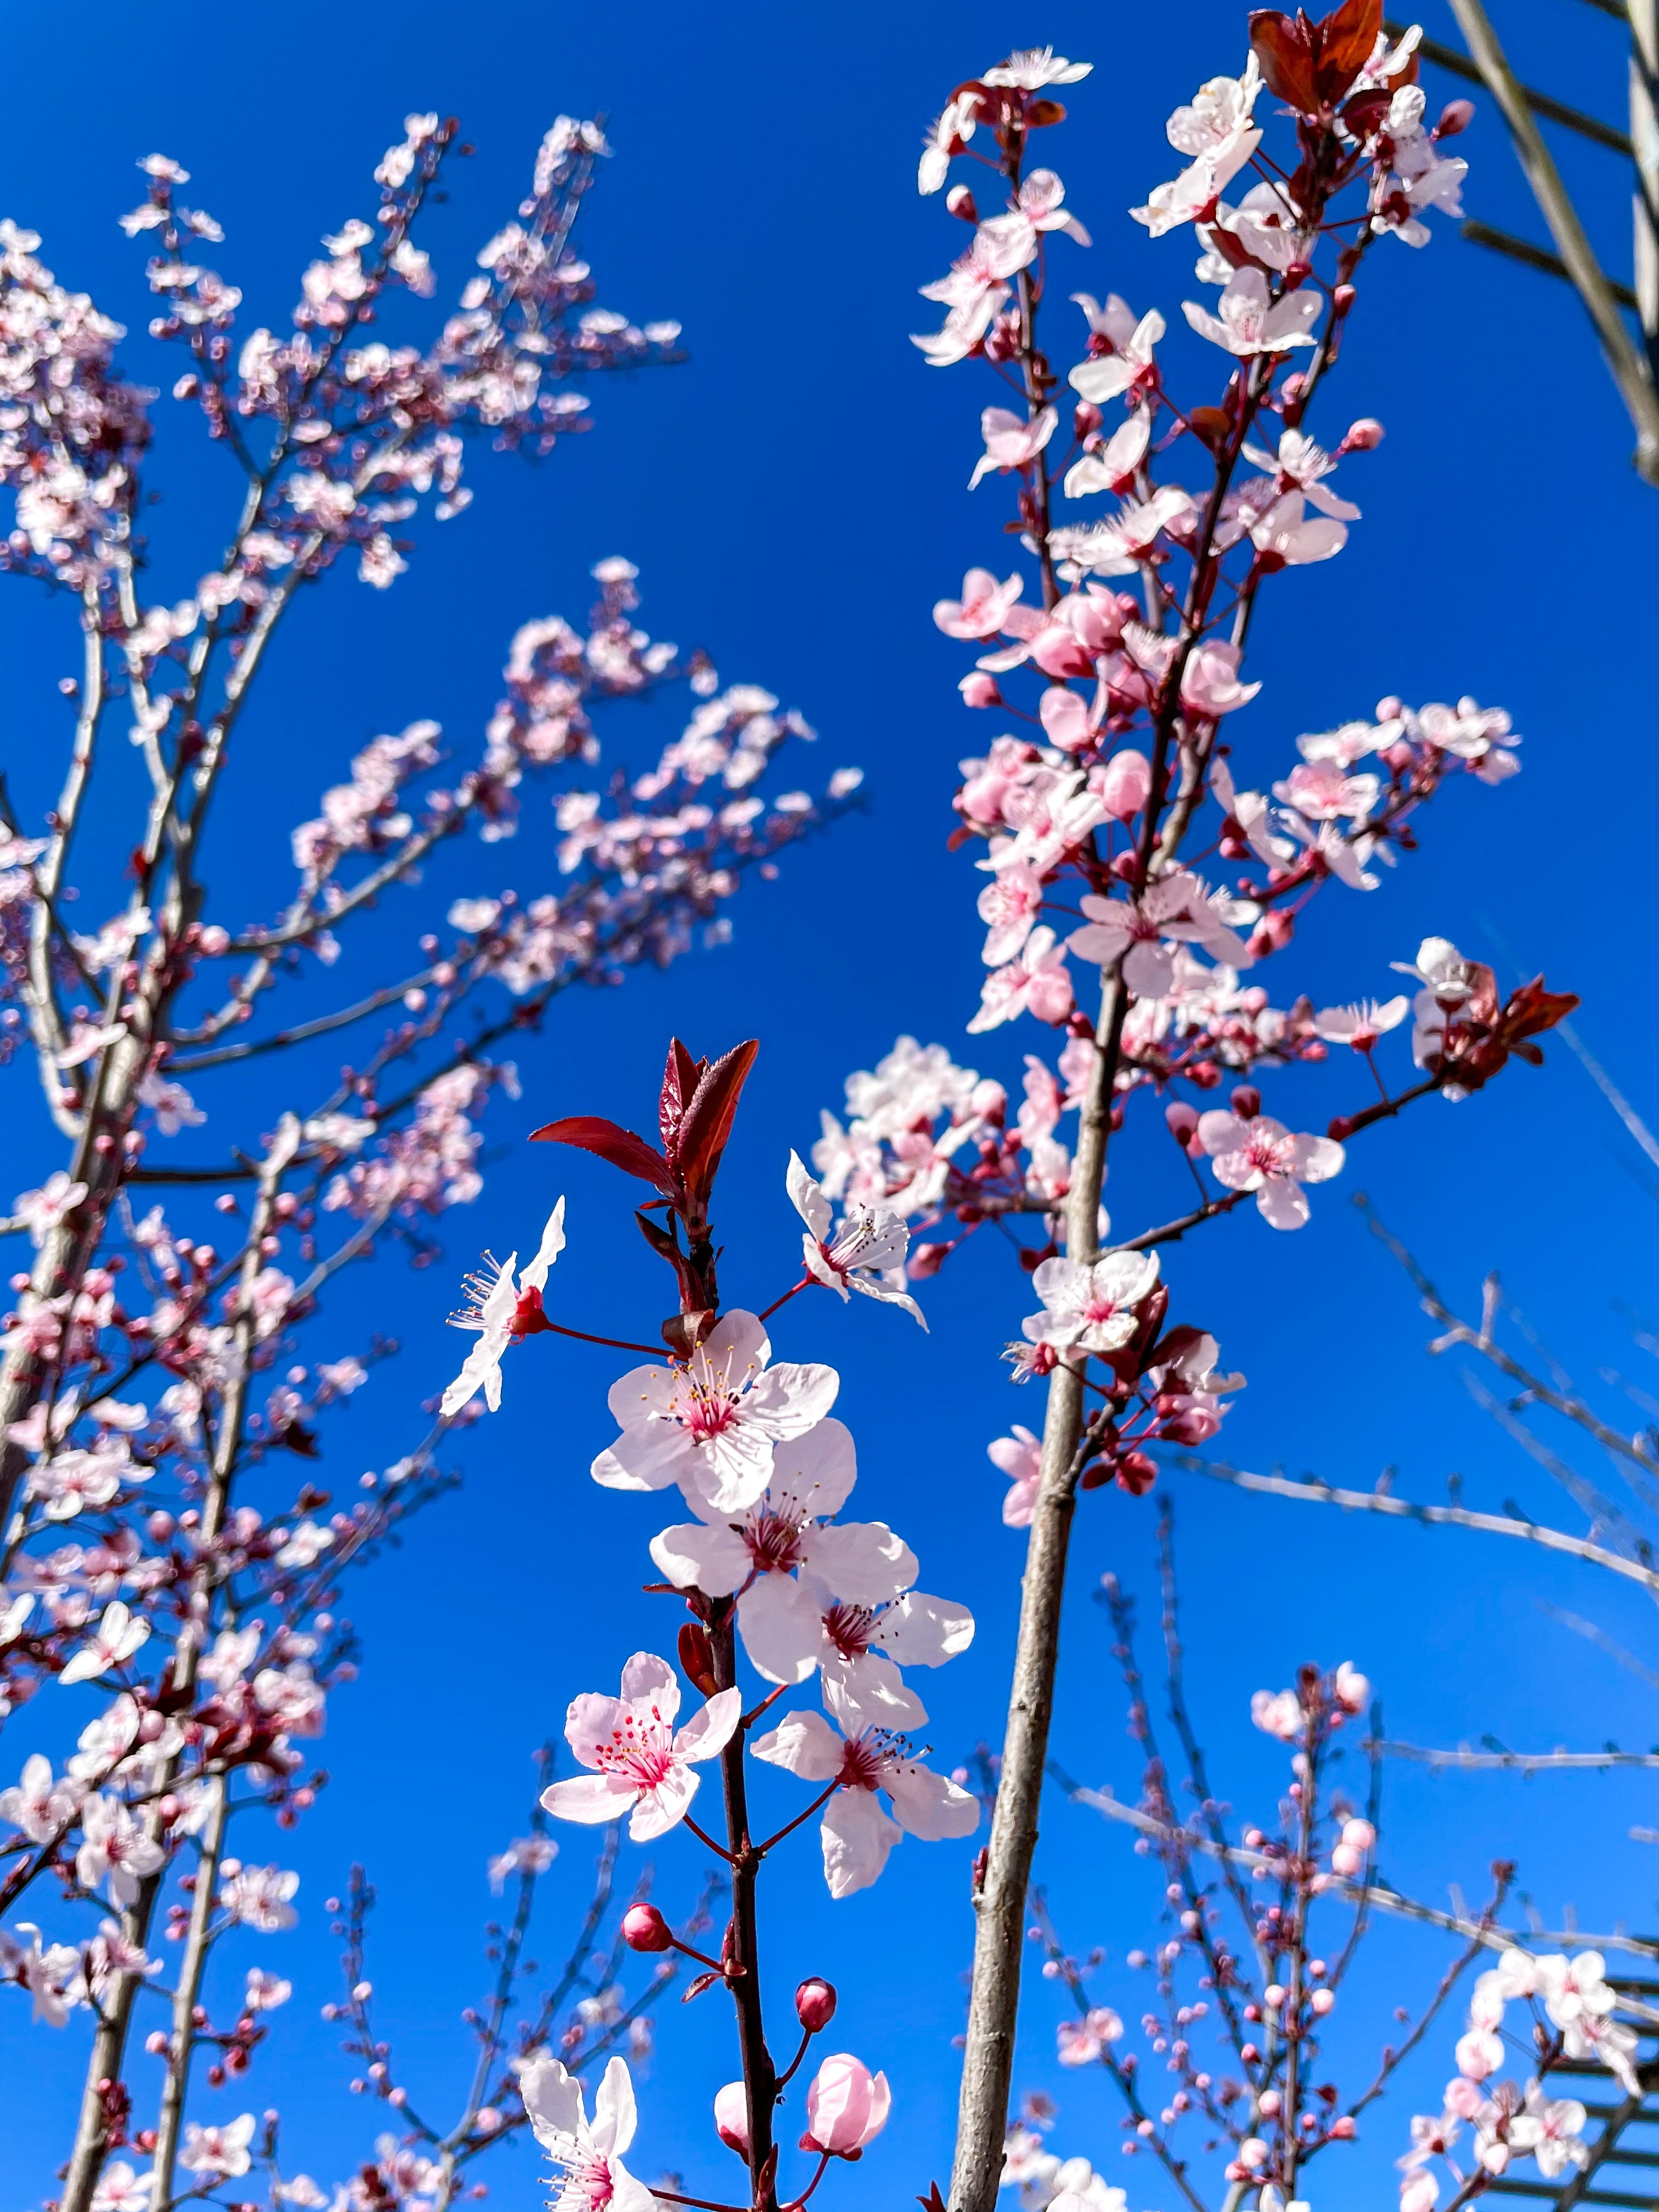 HD Cherry Blossom Android Images